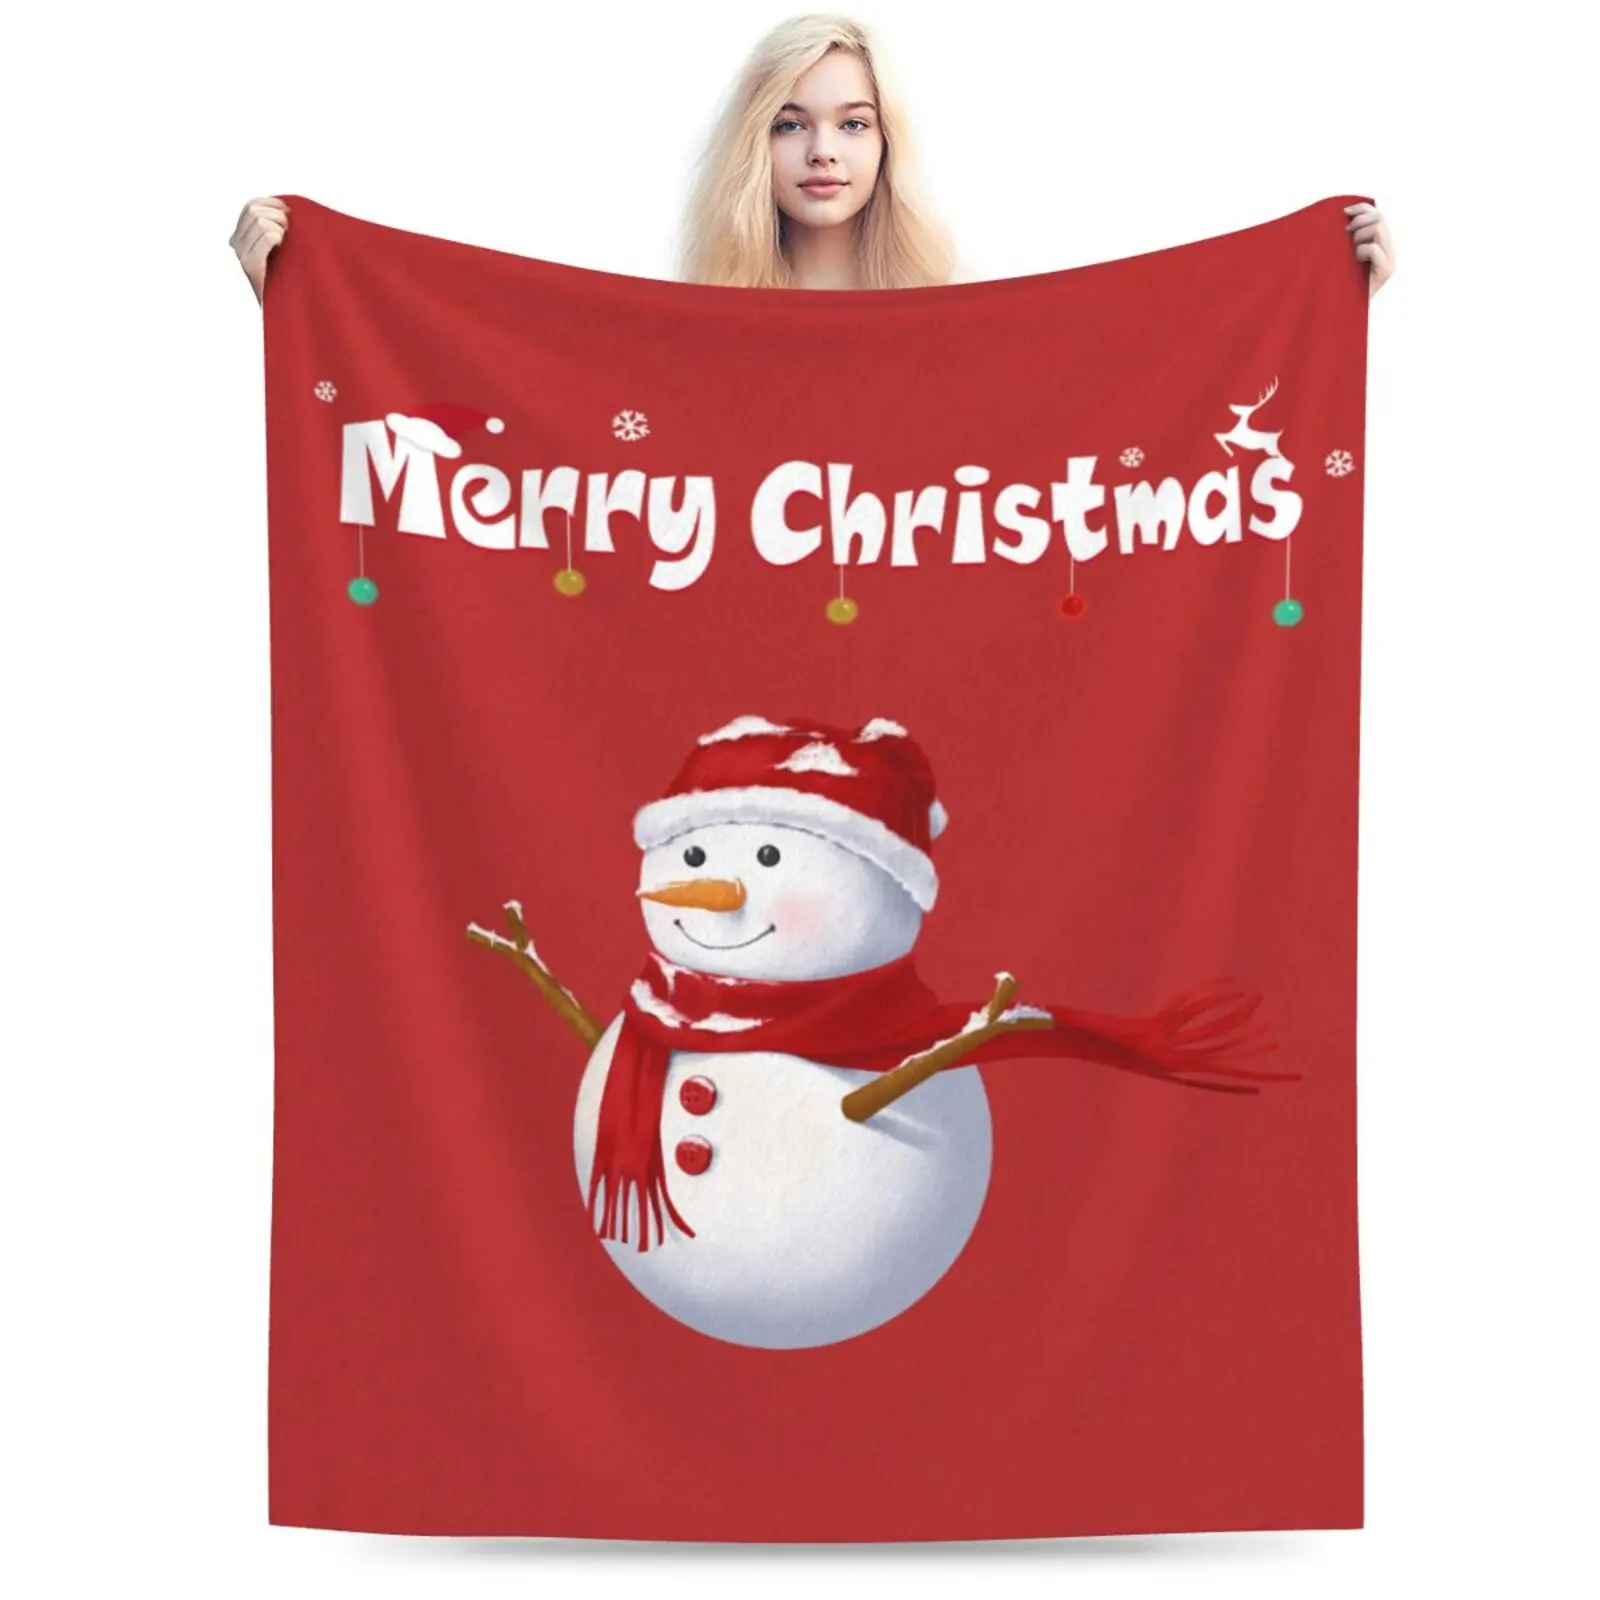 

Snowman Merry Christmas Throw Blanket Ultra-Soft Lightweight Flannel Cozy Blanket Gifts Ideas for Bed Couch Sofa